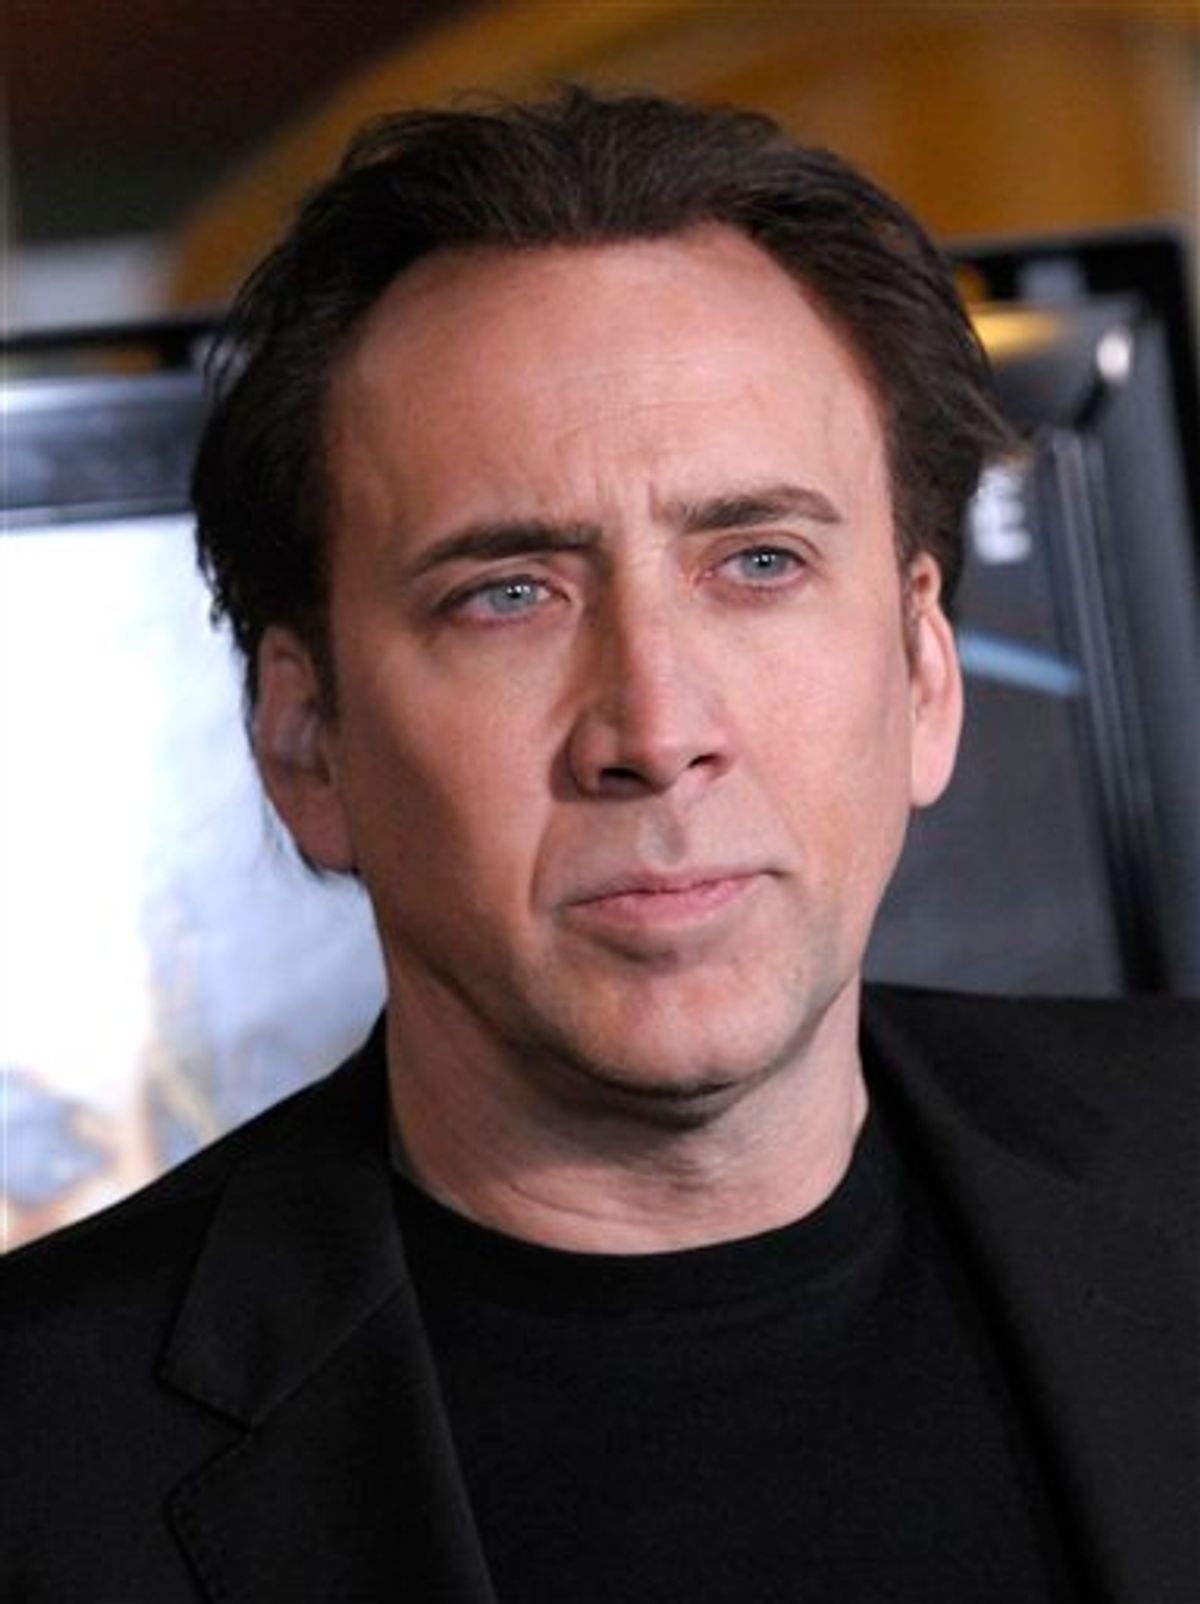 FILE - In this Feb. 22, 2011 file photo, actor Nicolas Cage arrives at the premiere of the feature film "Drive Angry" in Los Angeles. (AP Photo/Dan Steinberg, file) (AP)